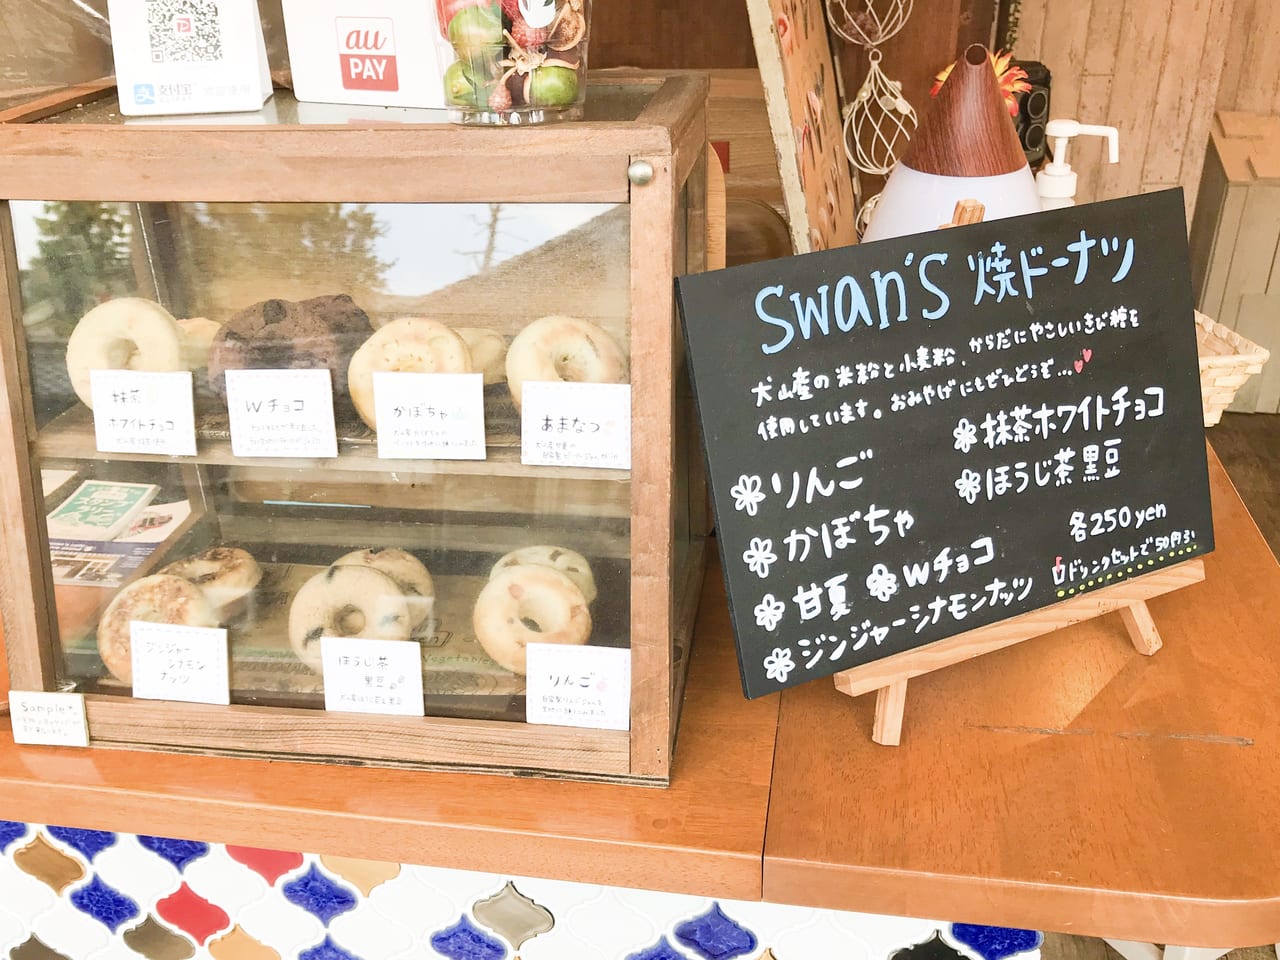 swan's cafe juice standの焼きドーナツ